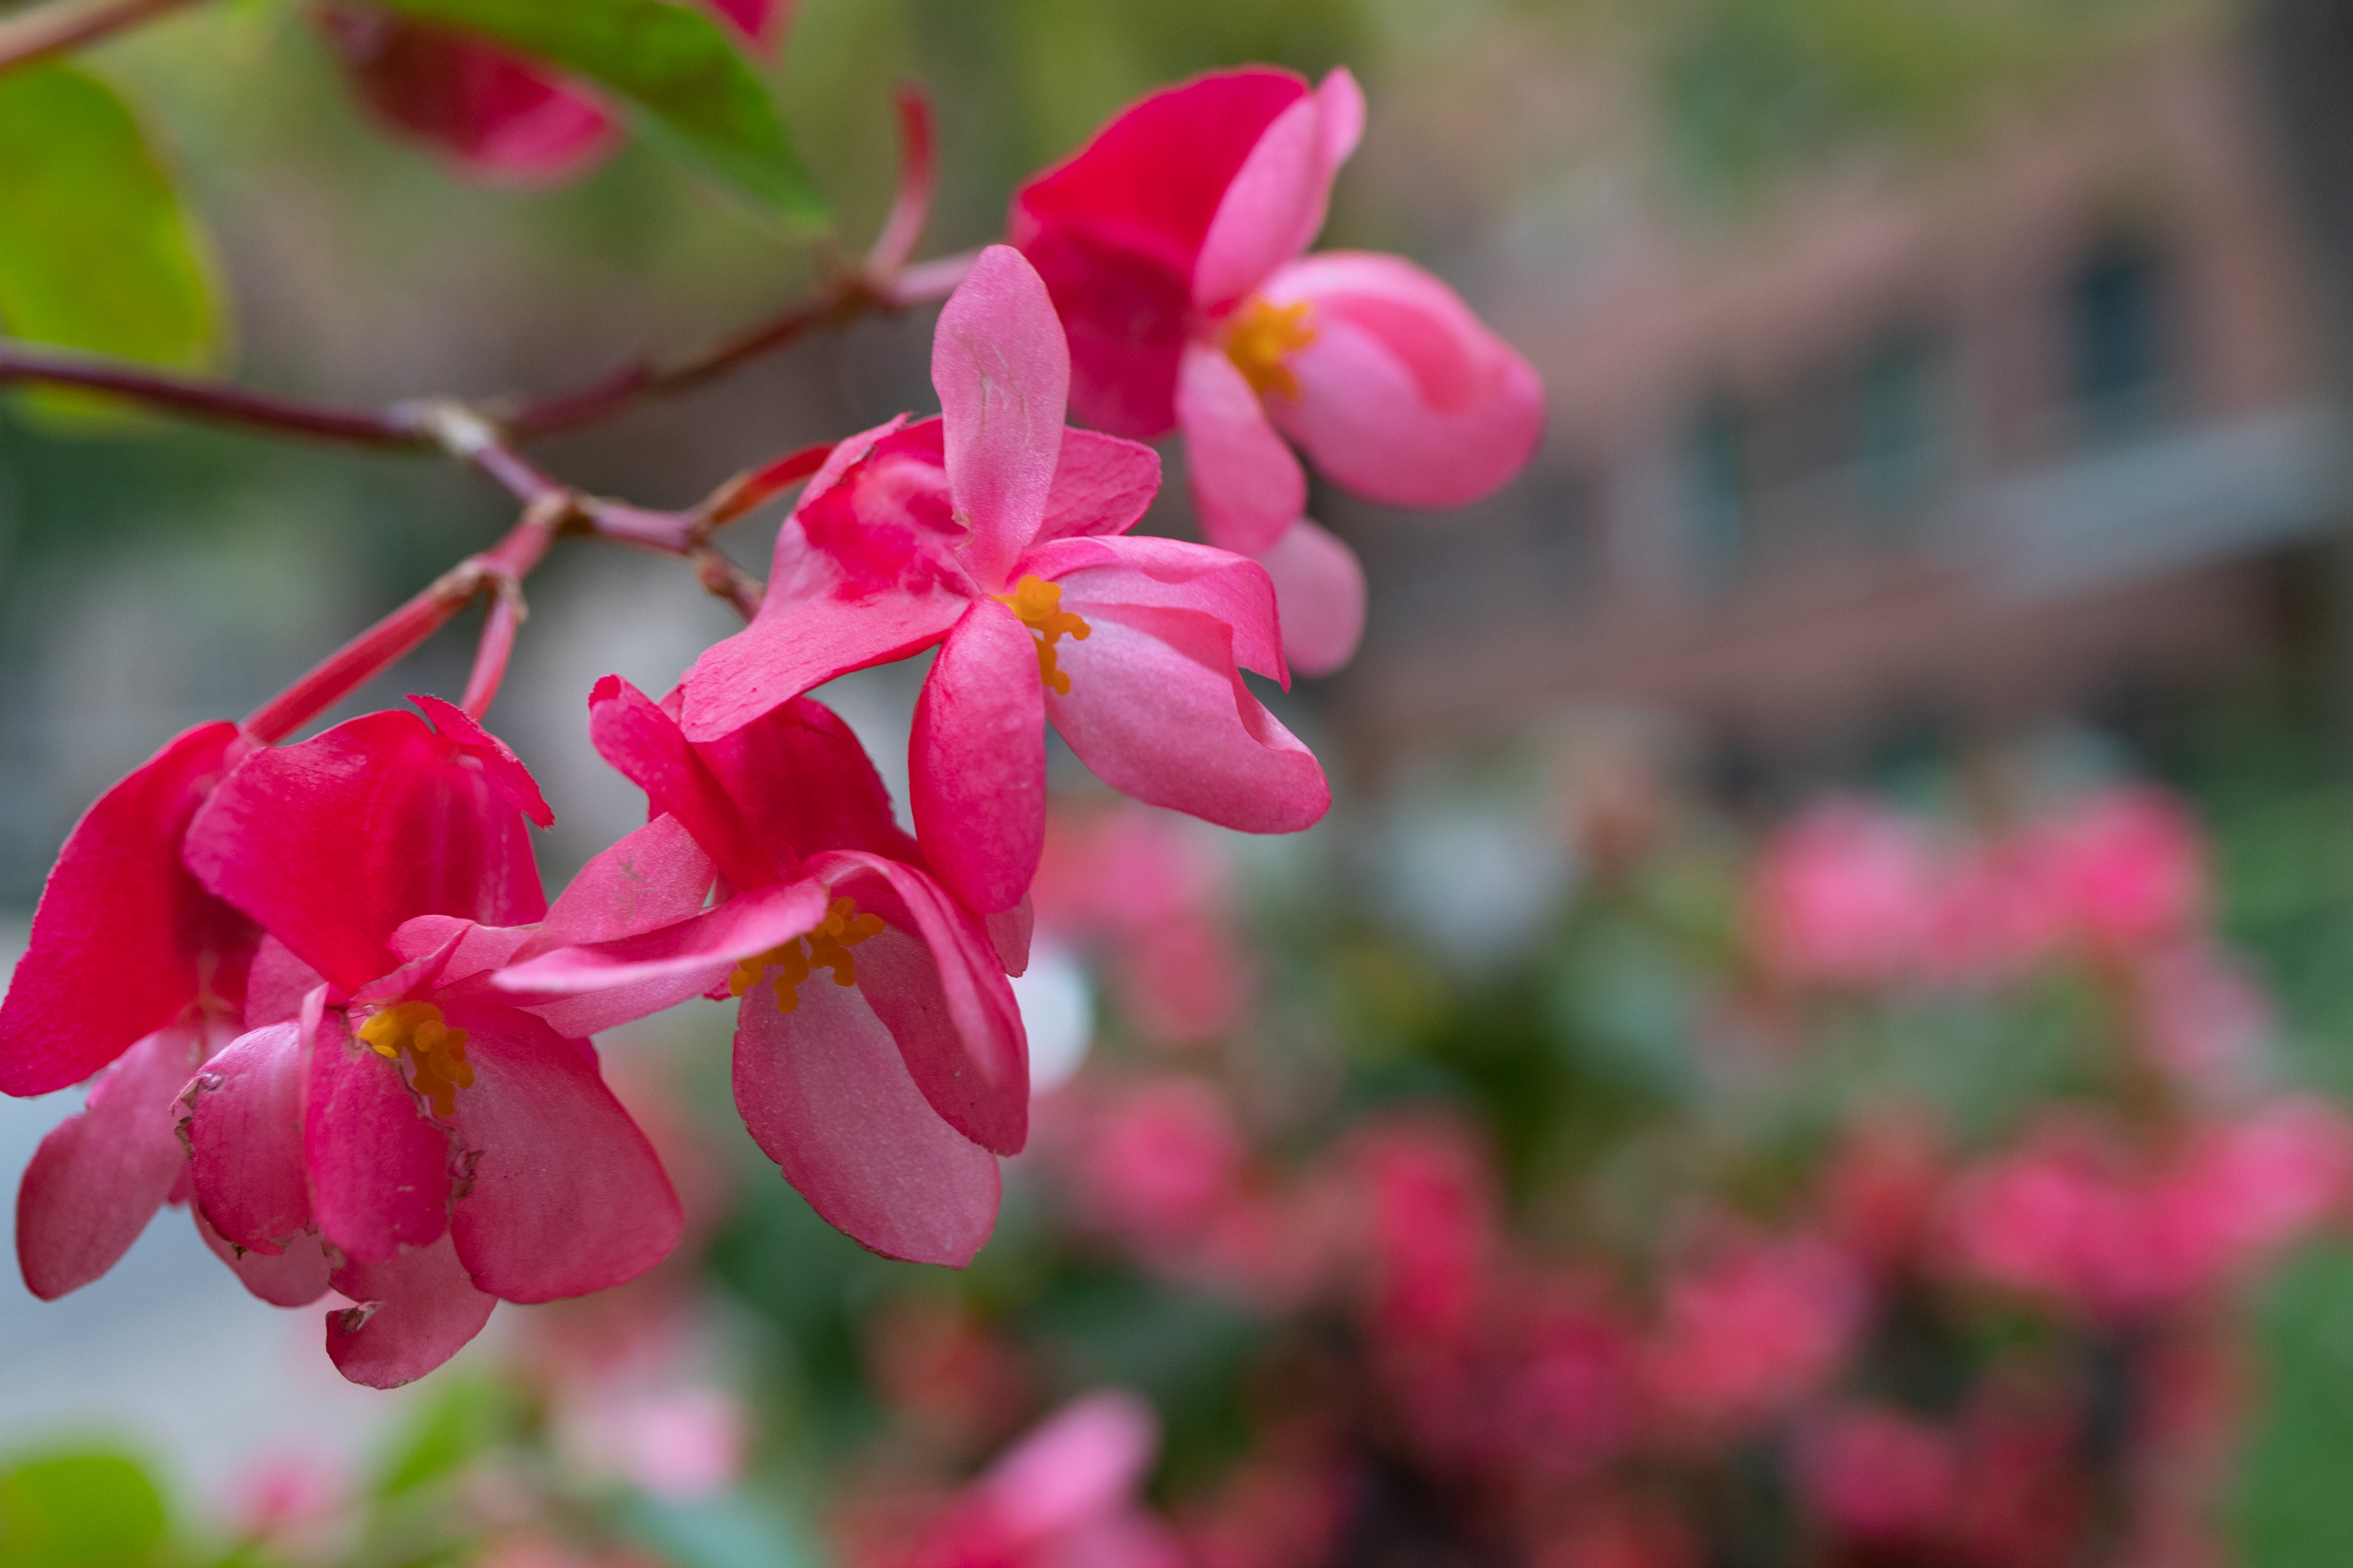 Several pink flowers with slim petals branching off from a single branch